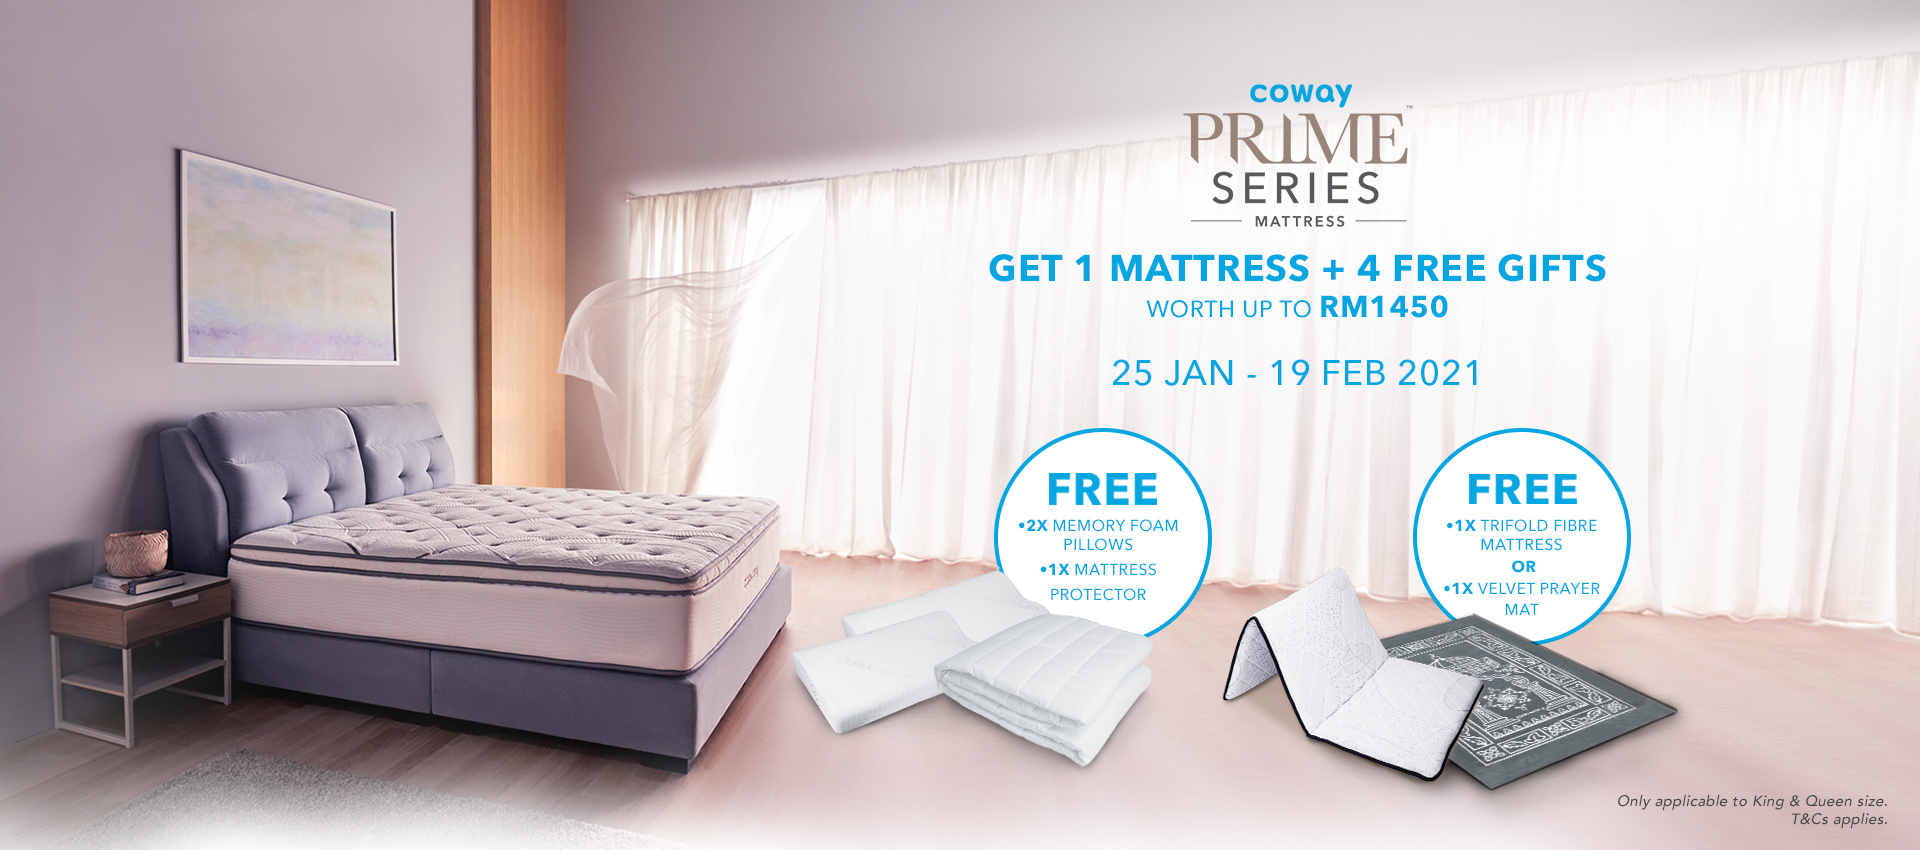 Coway 2021 Prime Series Promotion - Get 1 Mattress + 4 Free Gifts